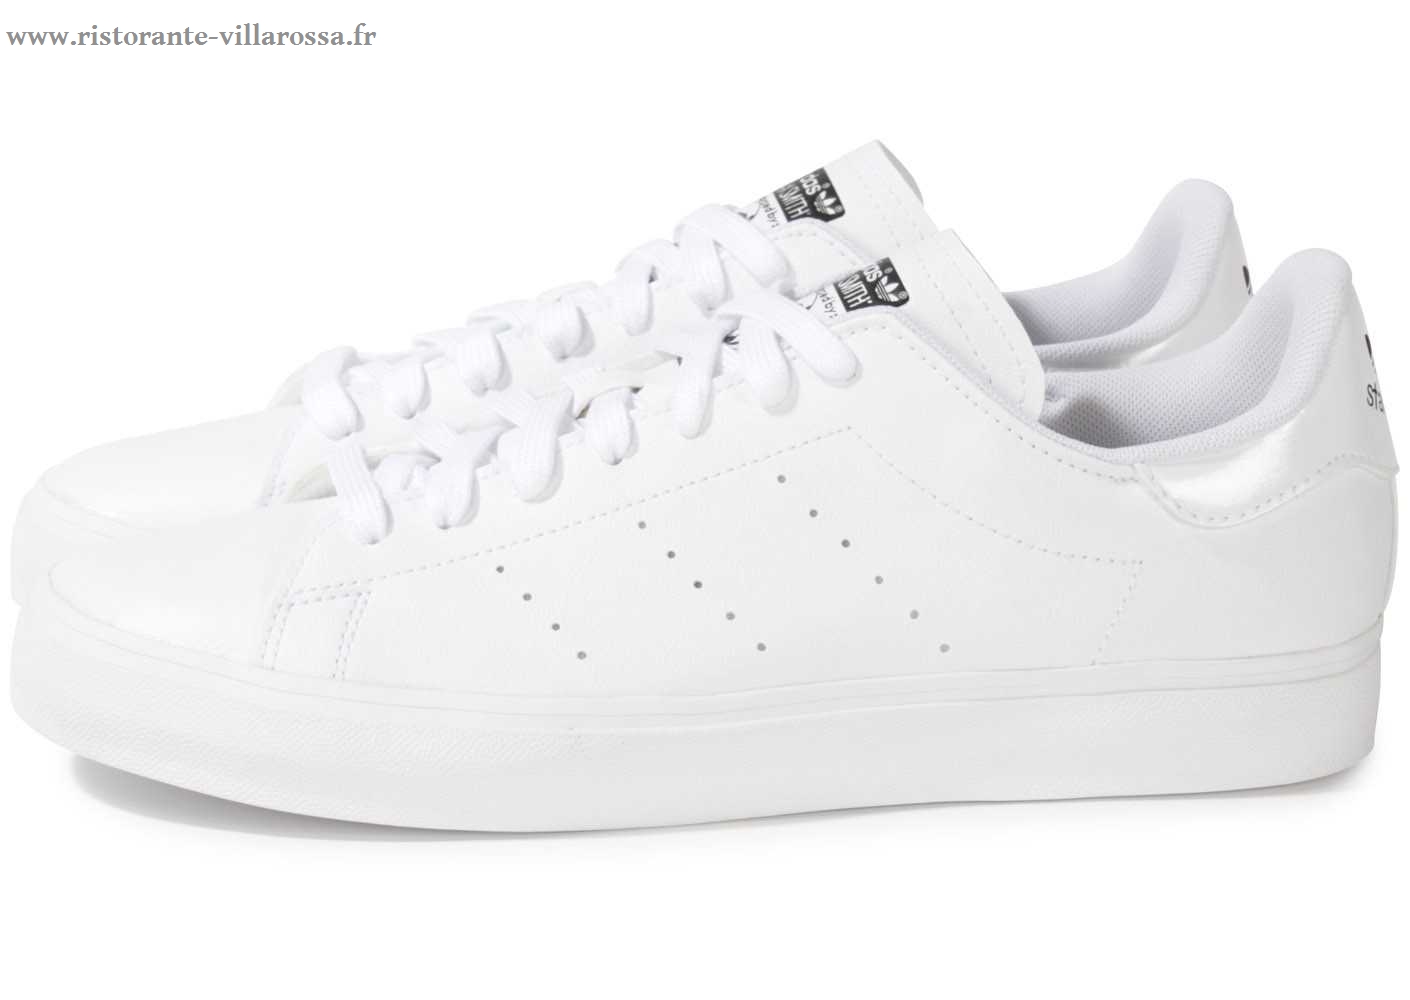 adidas chaussure homme blanche